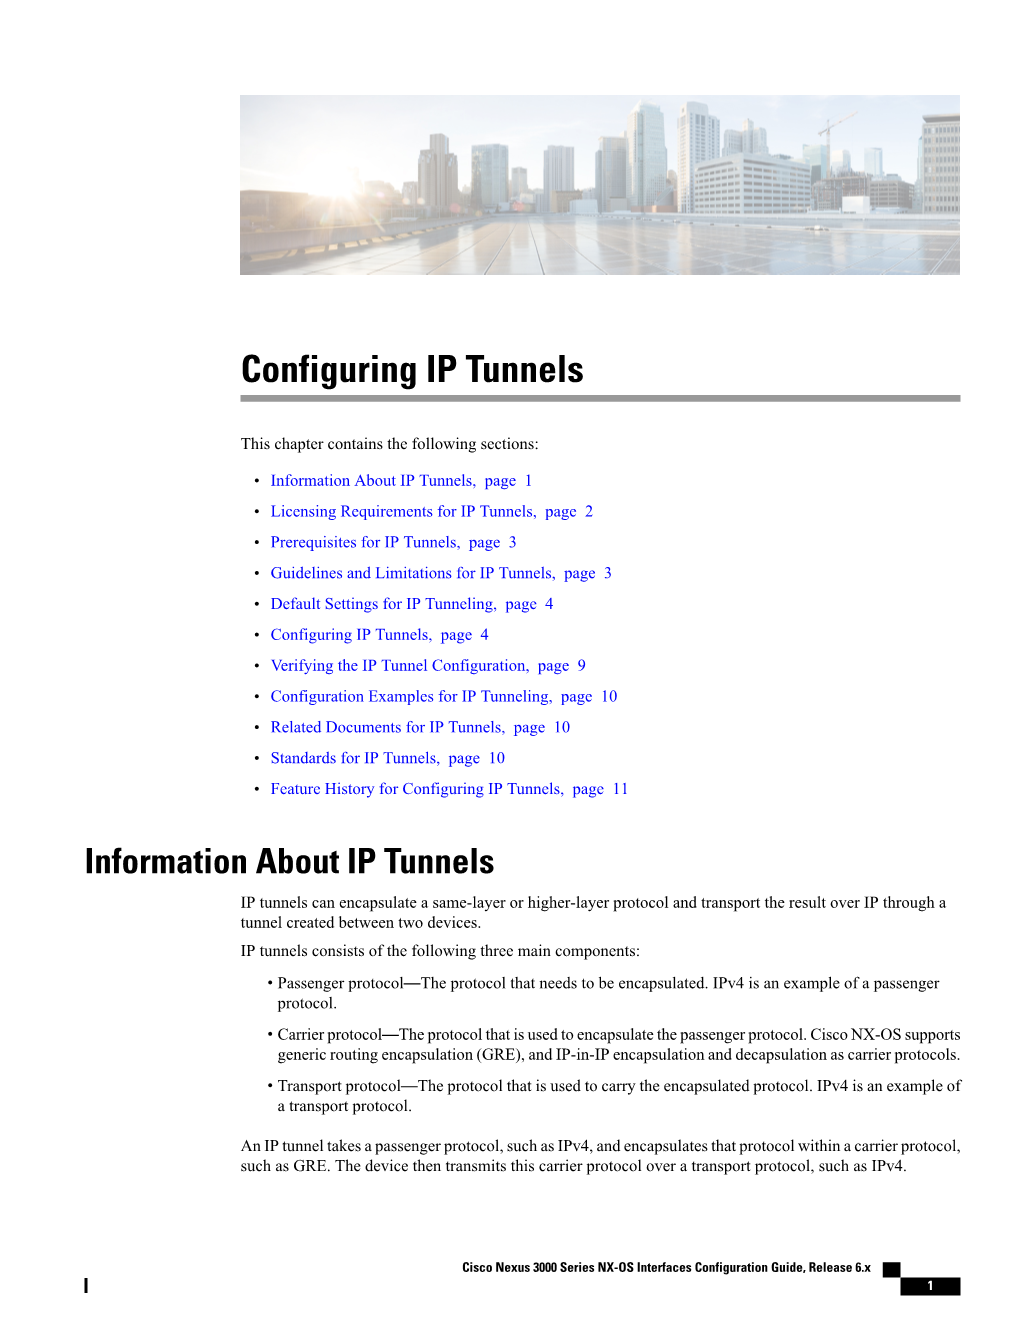 Configuring IP Tunnels